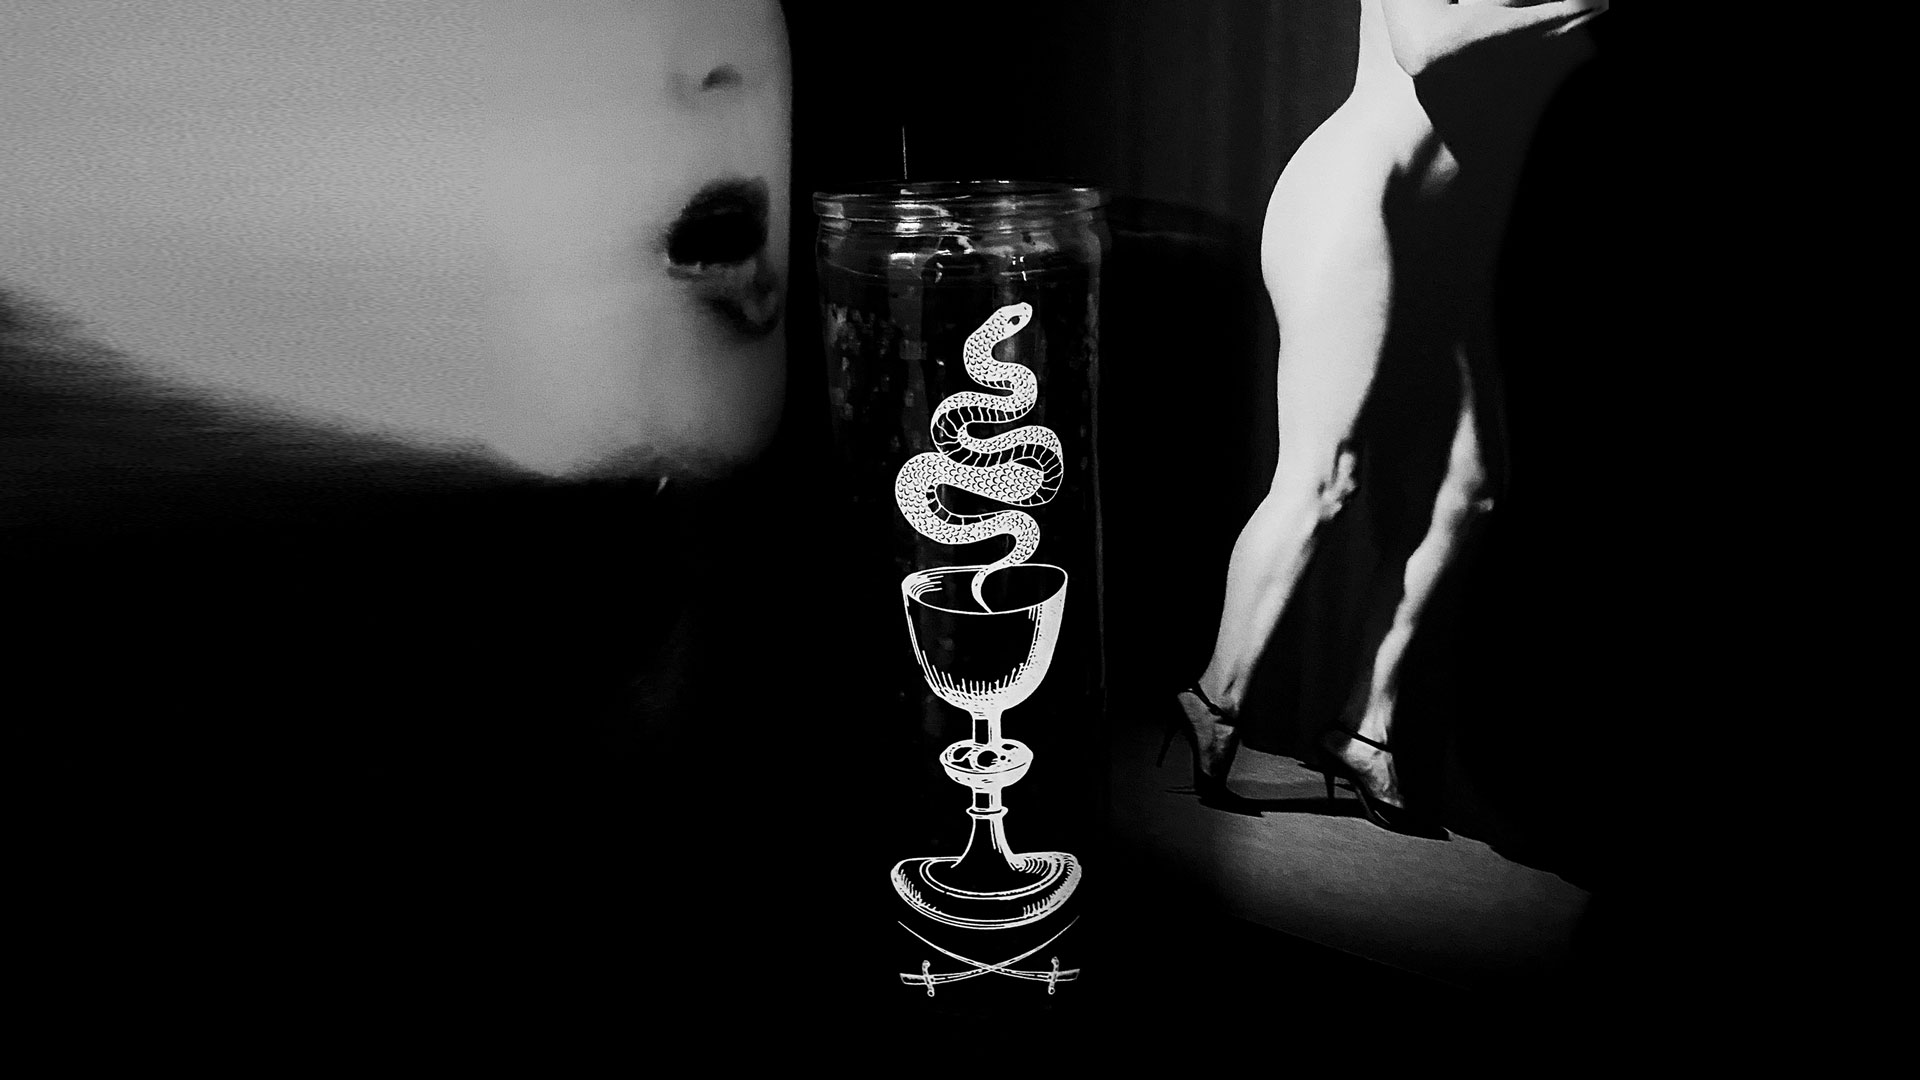 black candle with snake design with face and nude figure